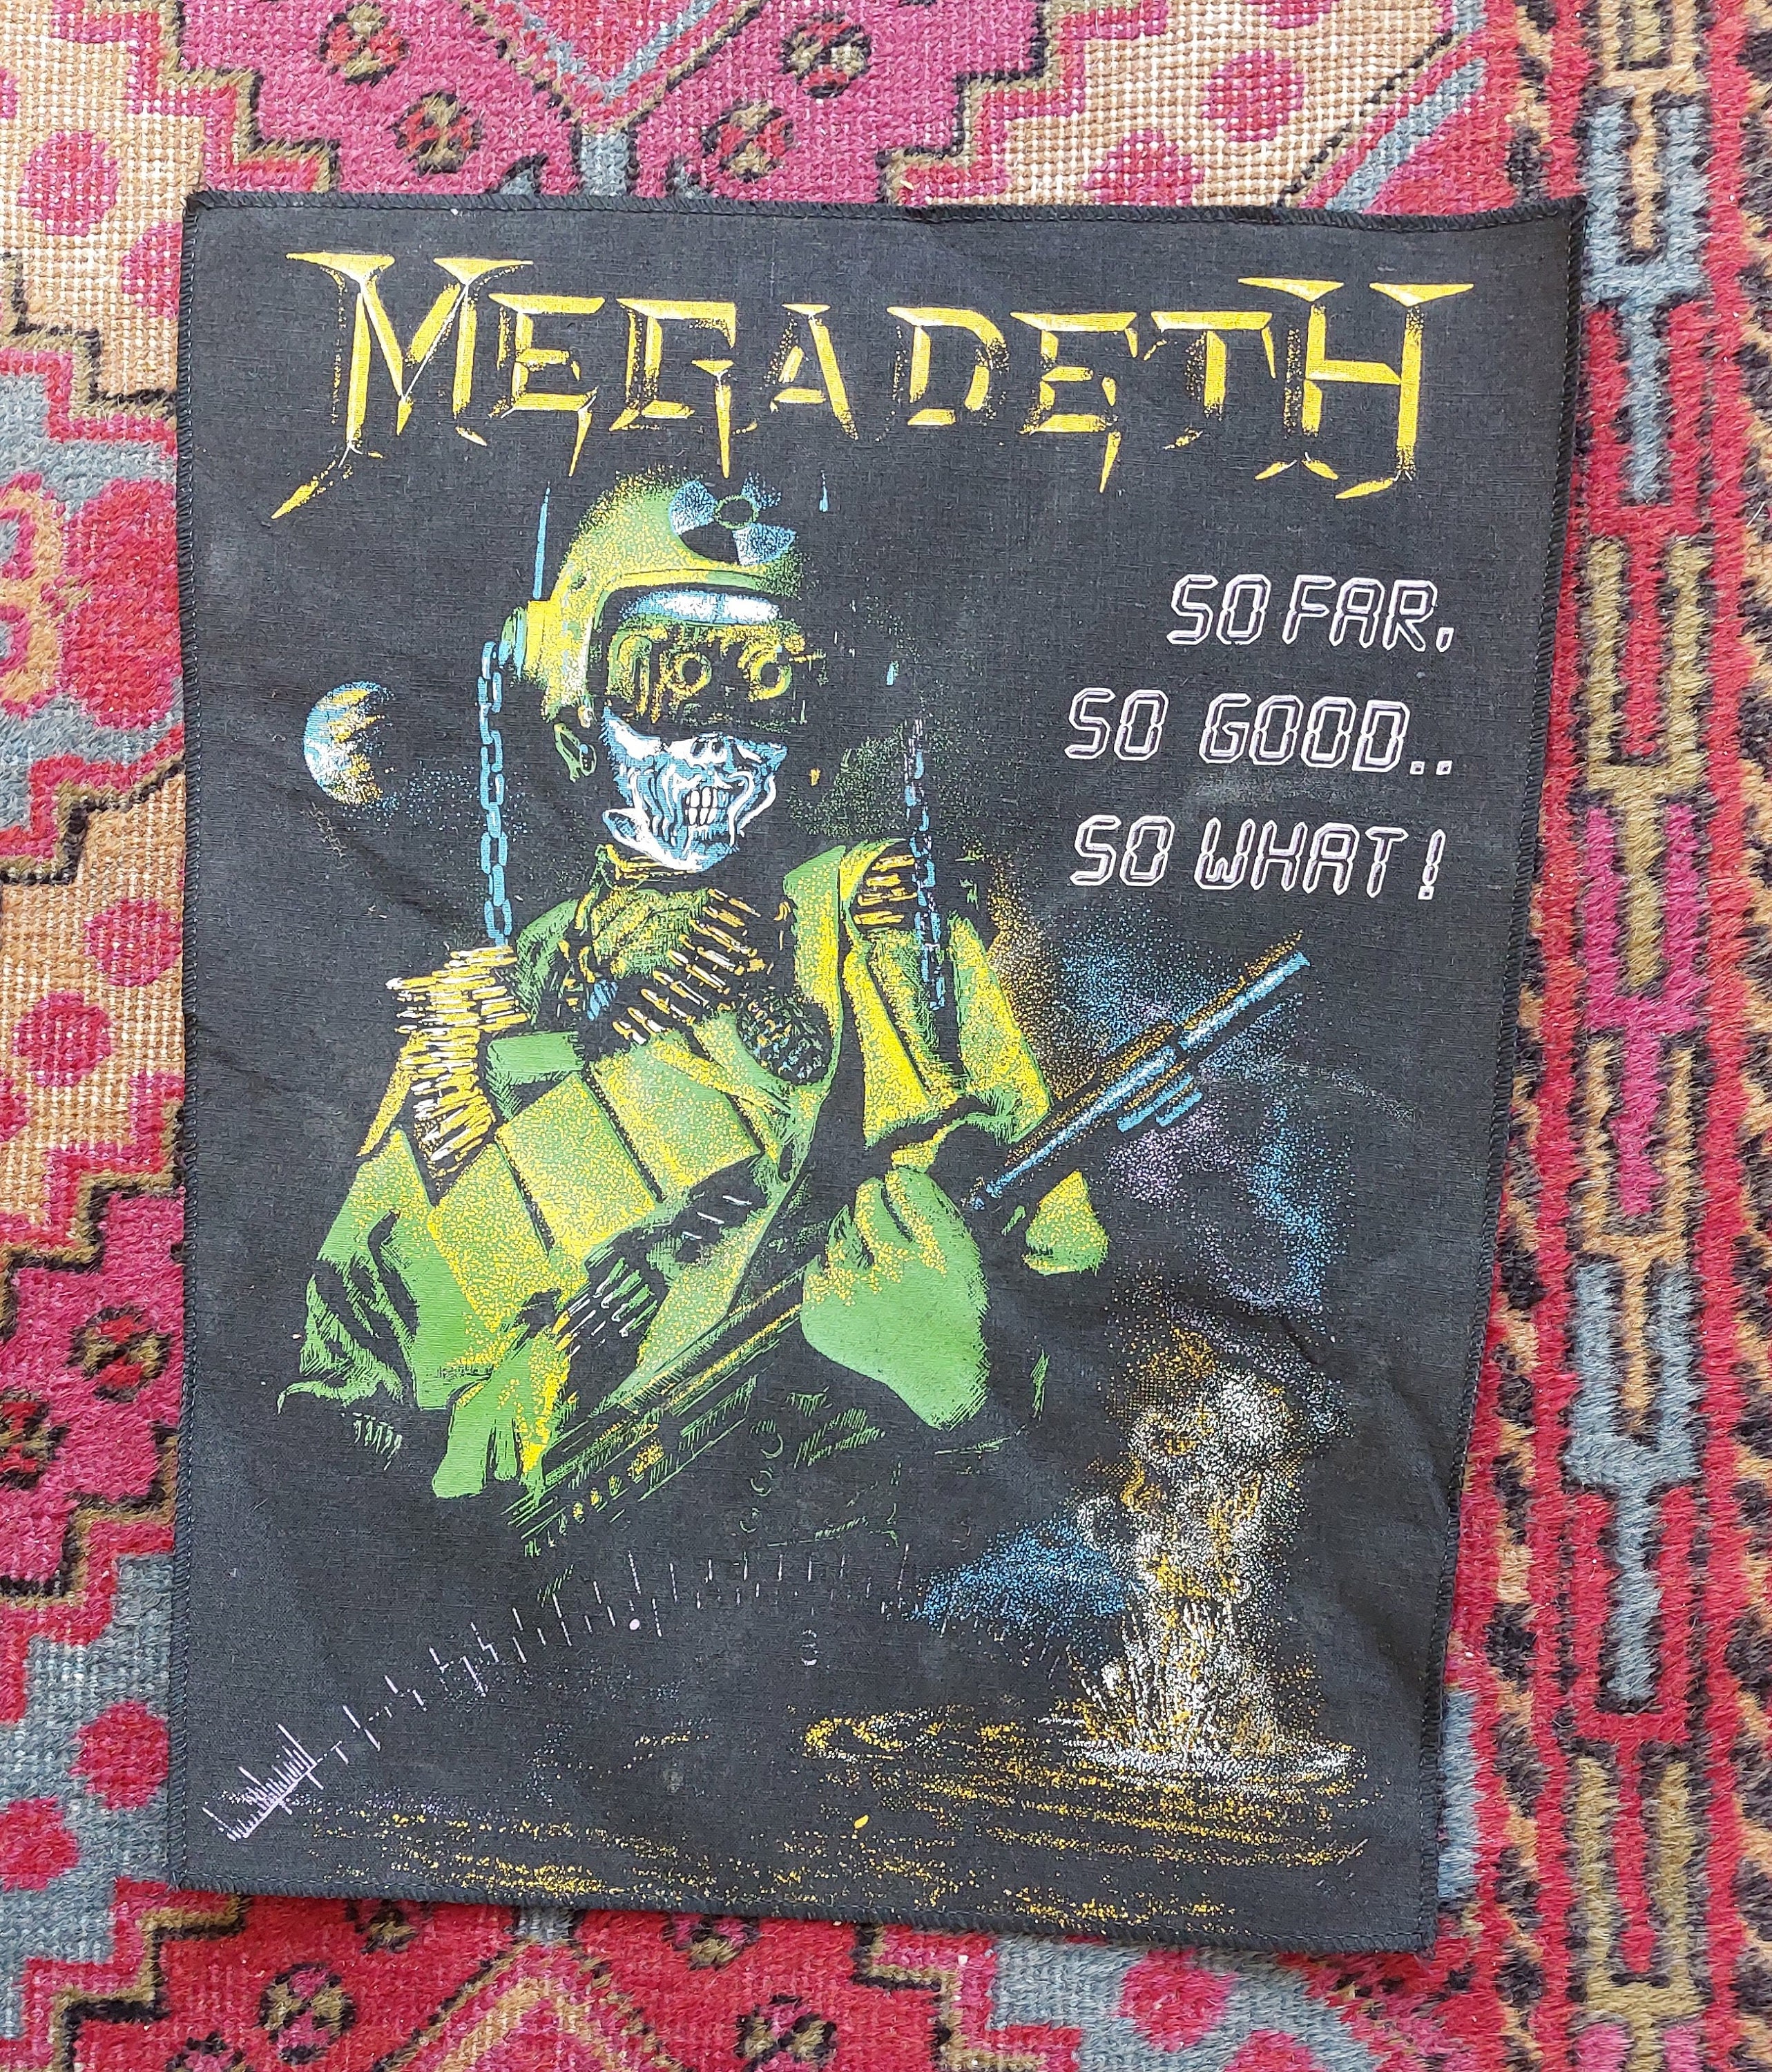 Megadeth - The Sick, The Dying And The Dead jacket patch